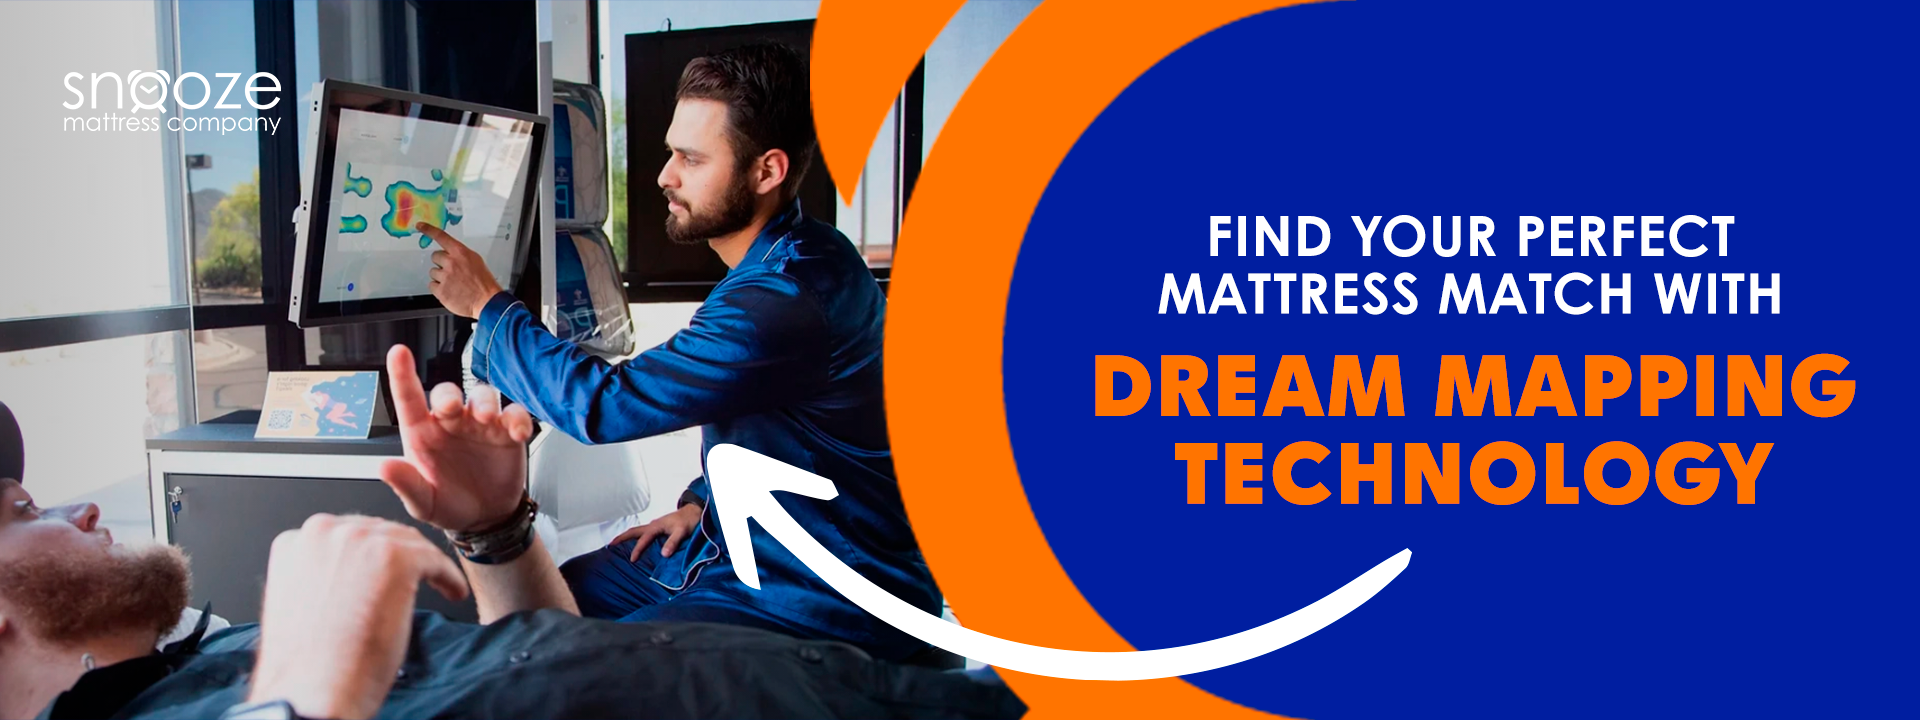 Find Your Perfect Mattress with Dream Mapping Technology